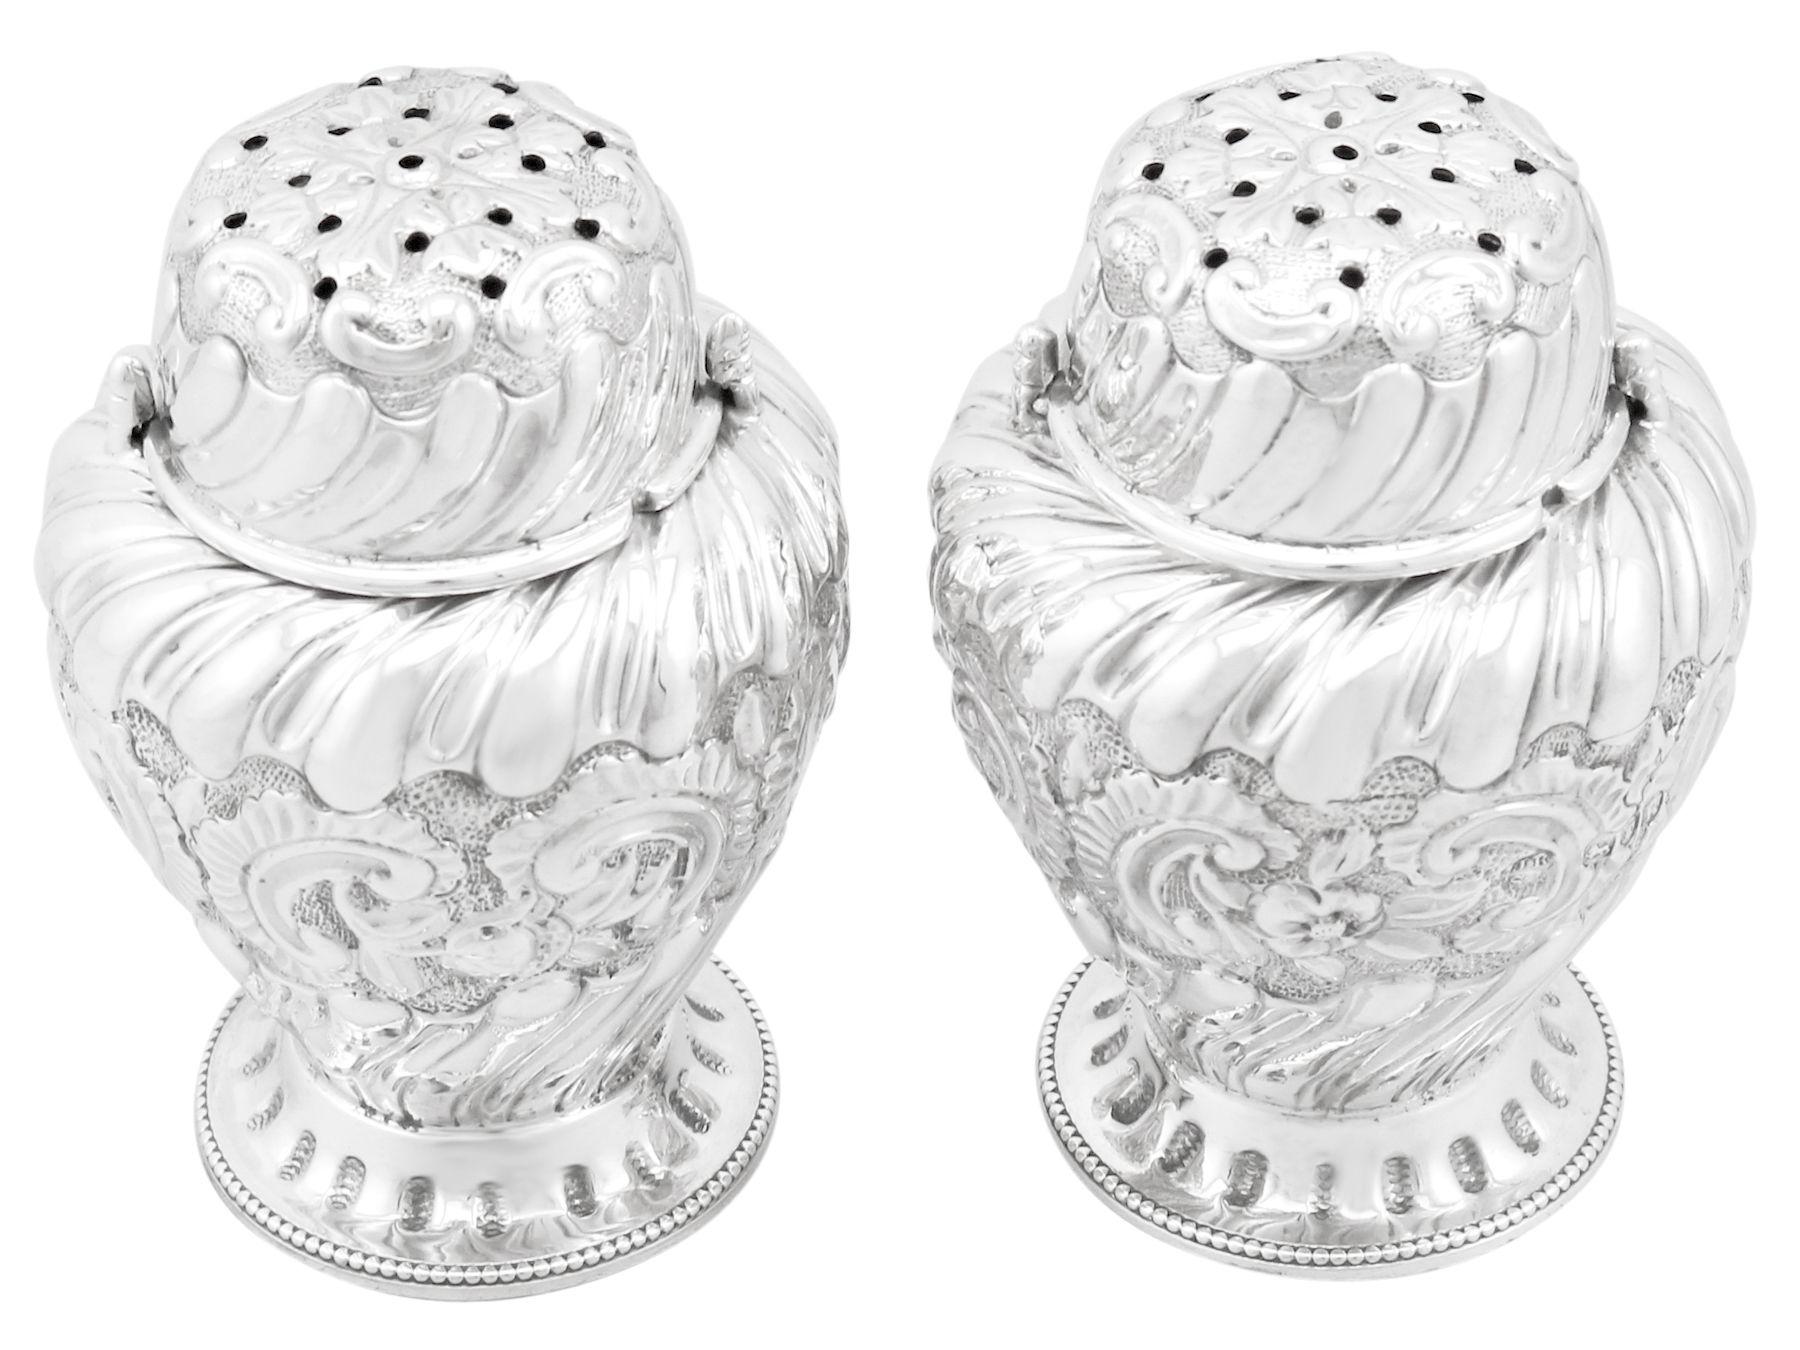 A fine and impressive pair of antique Victorian English sterling silver condiment shakers; an addition to our silver tableware collection

These impressive antique Victorian English sterling silver condiment shakers have an inverted pear shaped